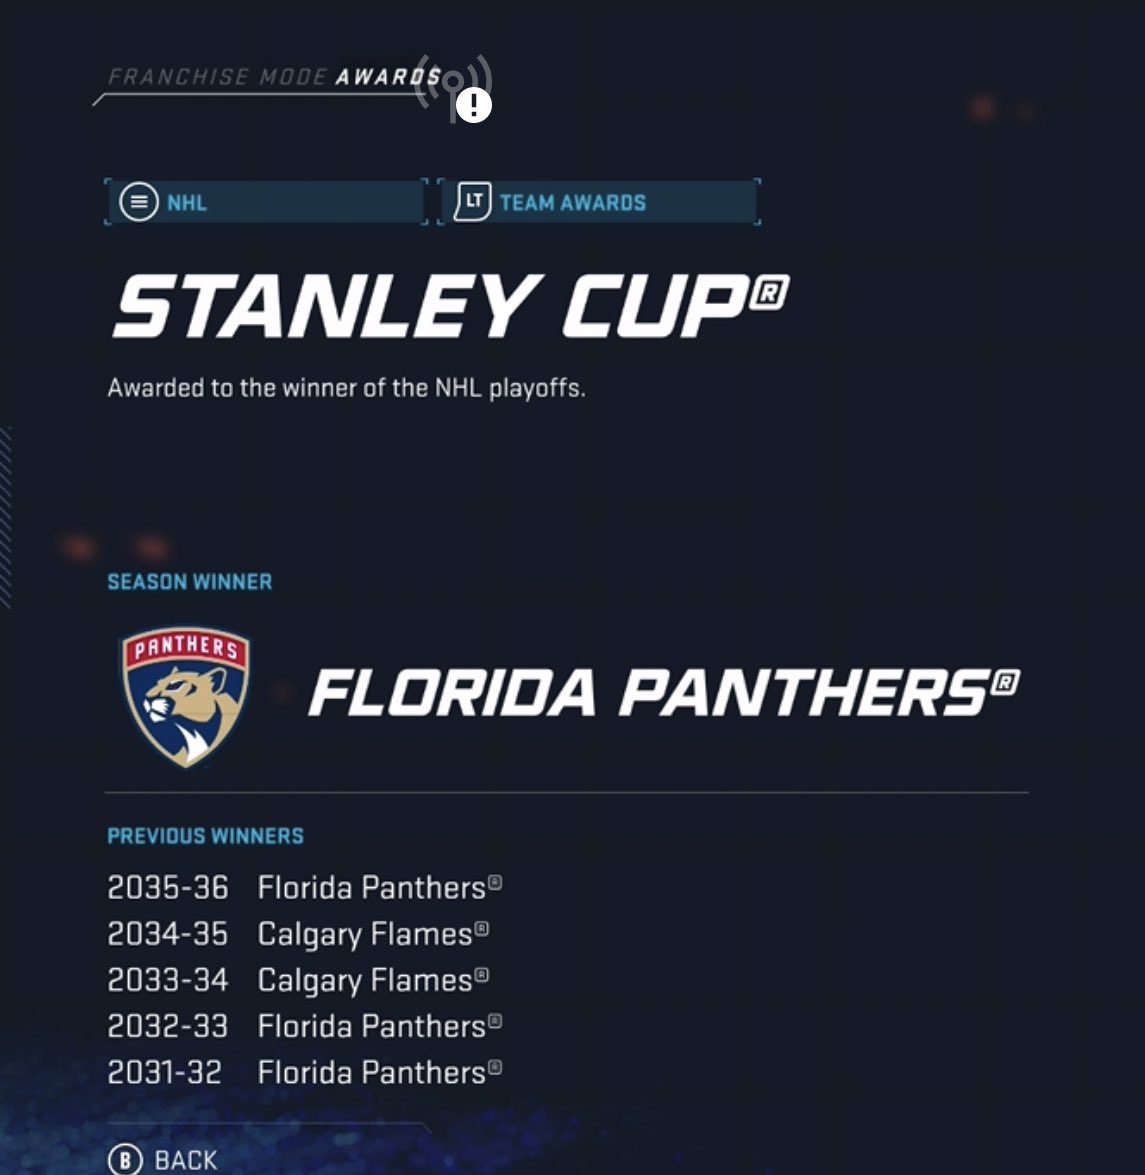 There are modern day dynasties and then there’s this Florida Panthers team I had back in Chel 20... https://t.co/4lgWy4GVIr